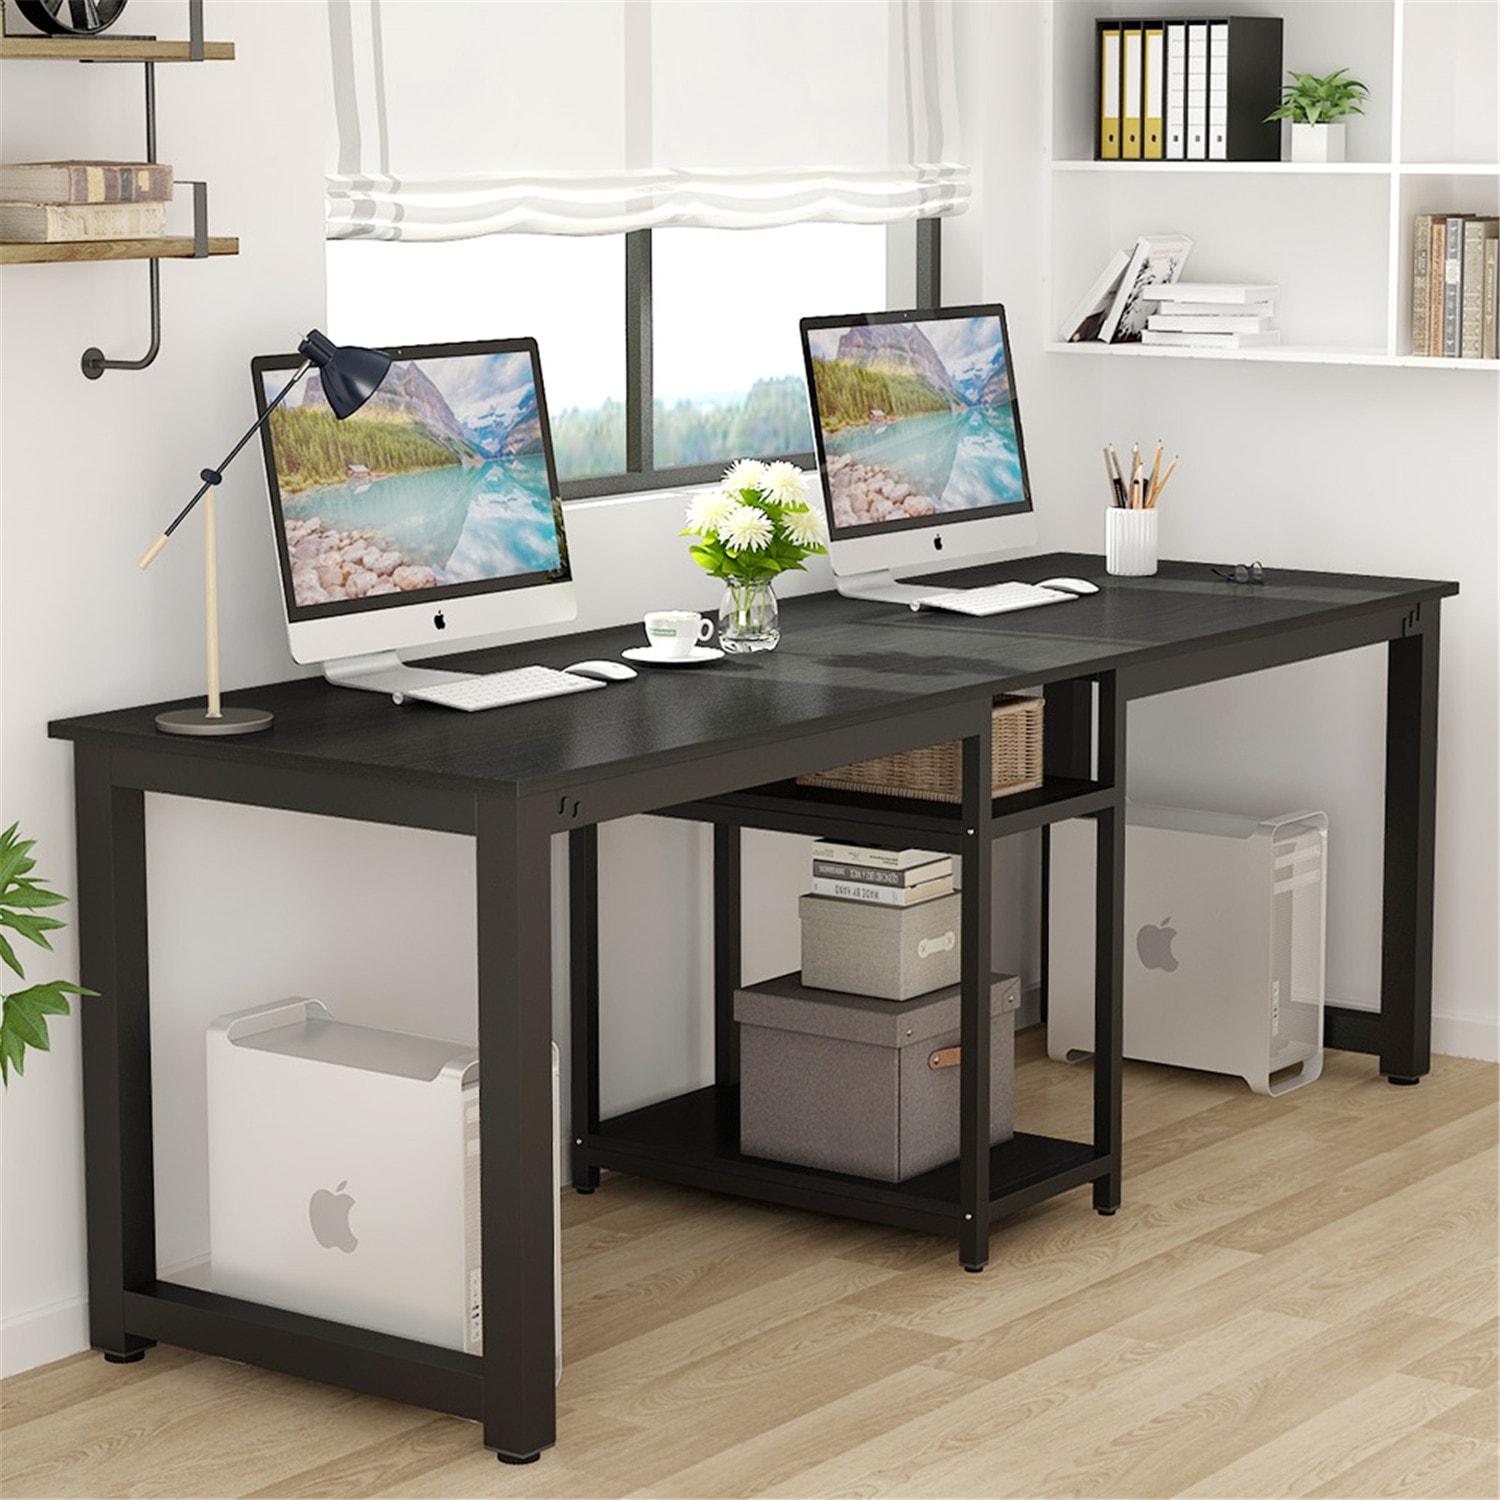 https://ak1.ostkcdn.com/images/products/is/images/direct/a5e18d73b82221ade0fc808977711bf9942533cd/78-Inches-Computer-Desk-Double-Workstation%2C-Two-Person-Office-Desk-with-Shelves.jpg